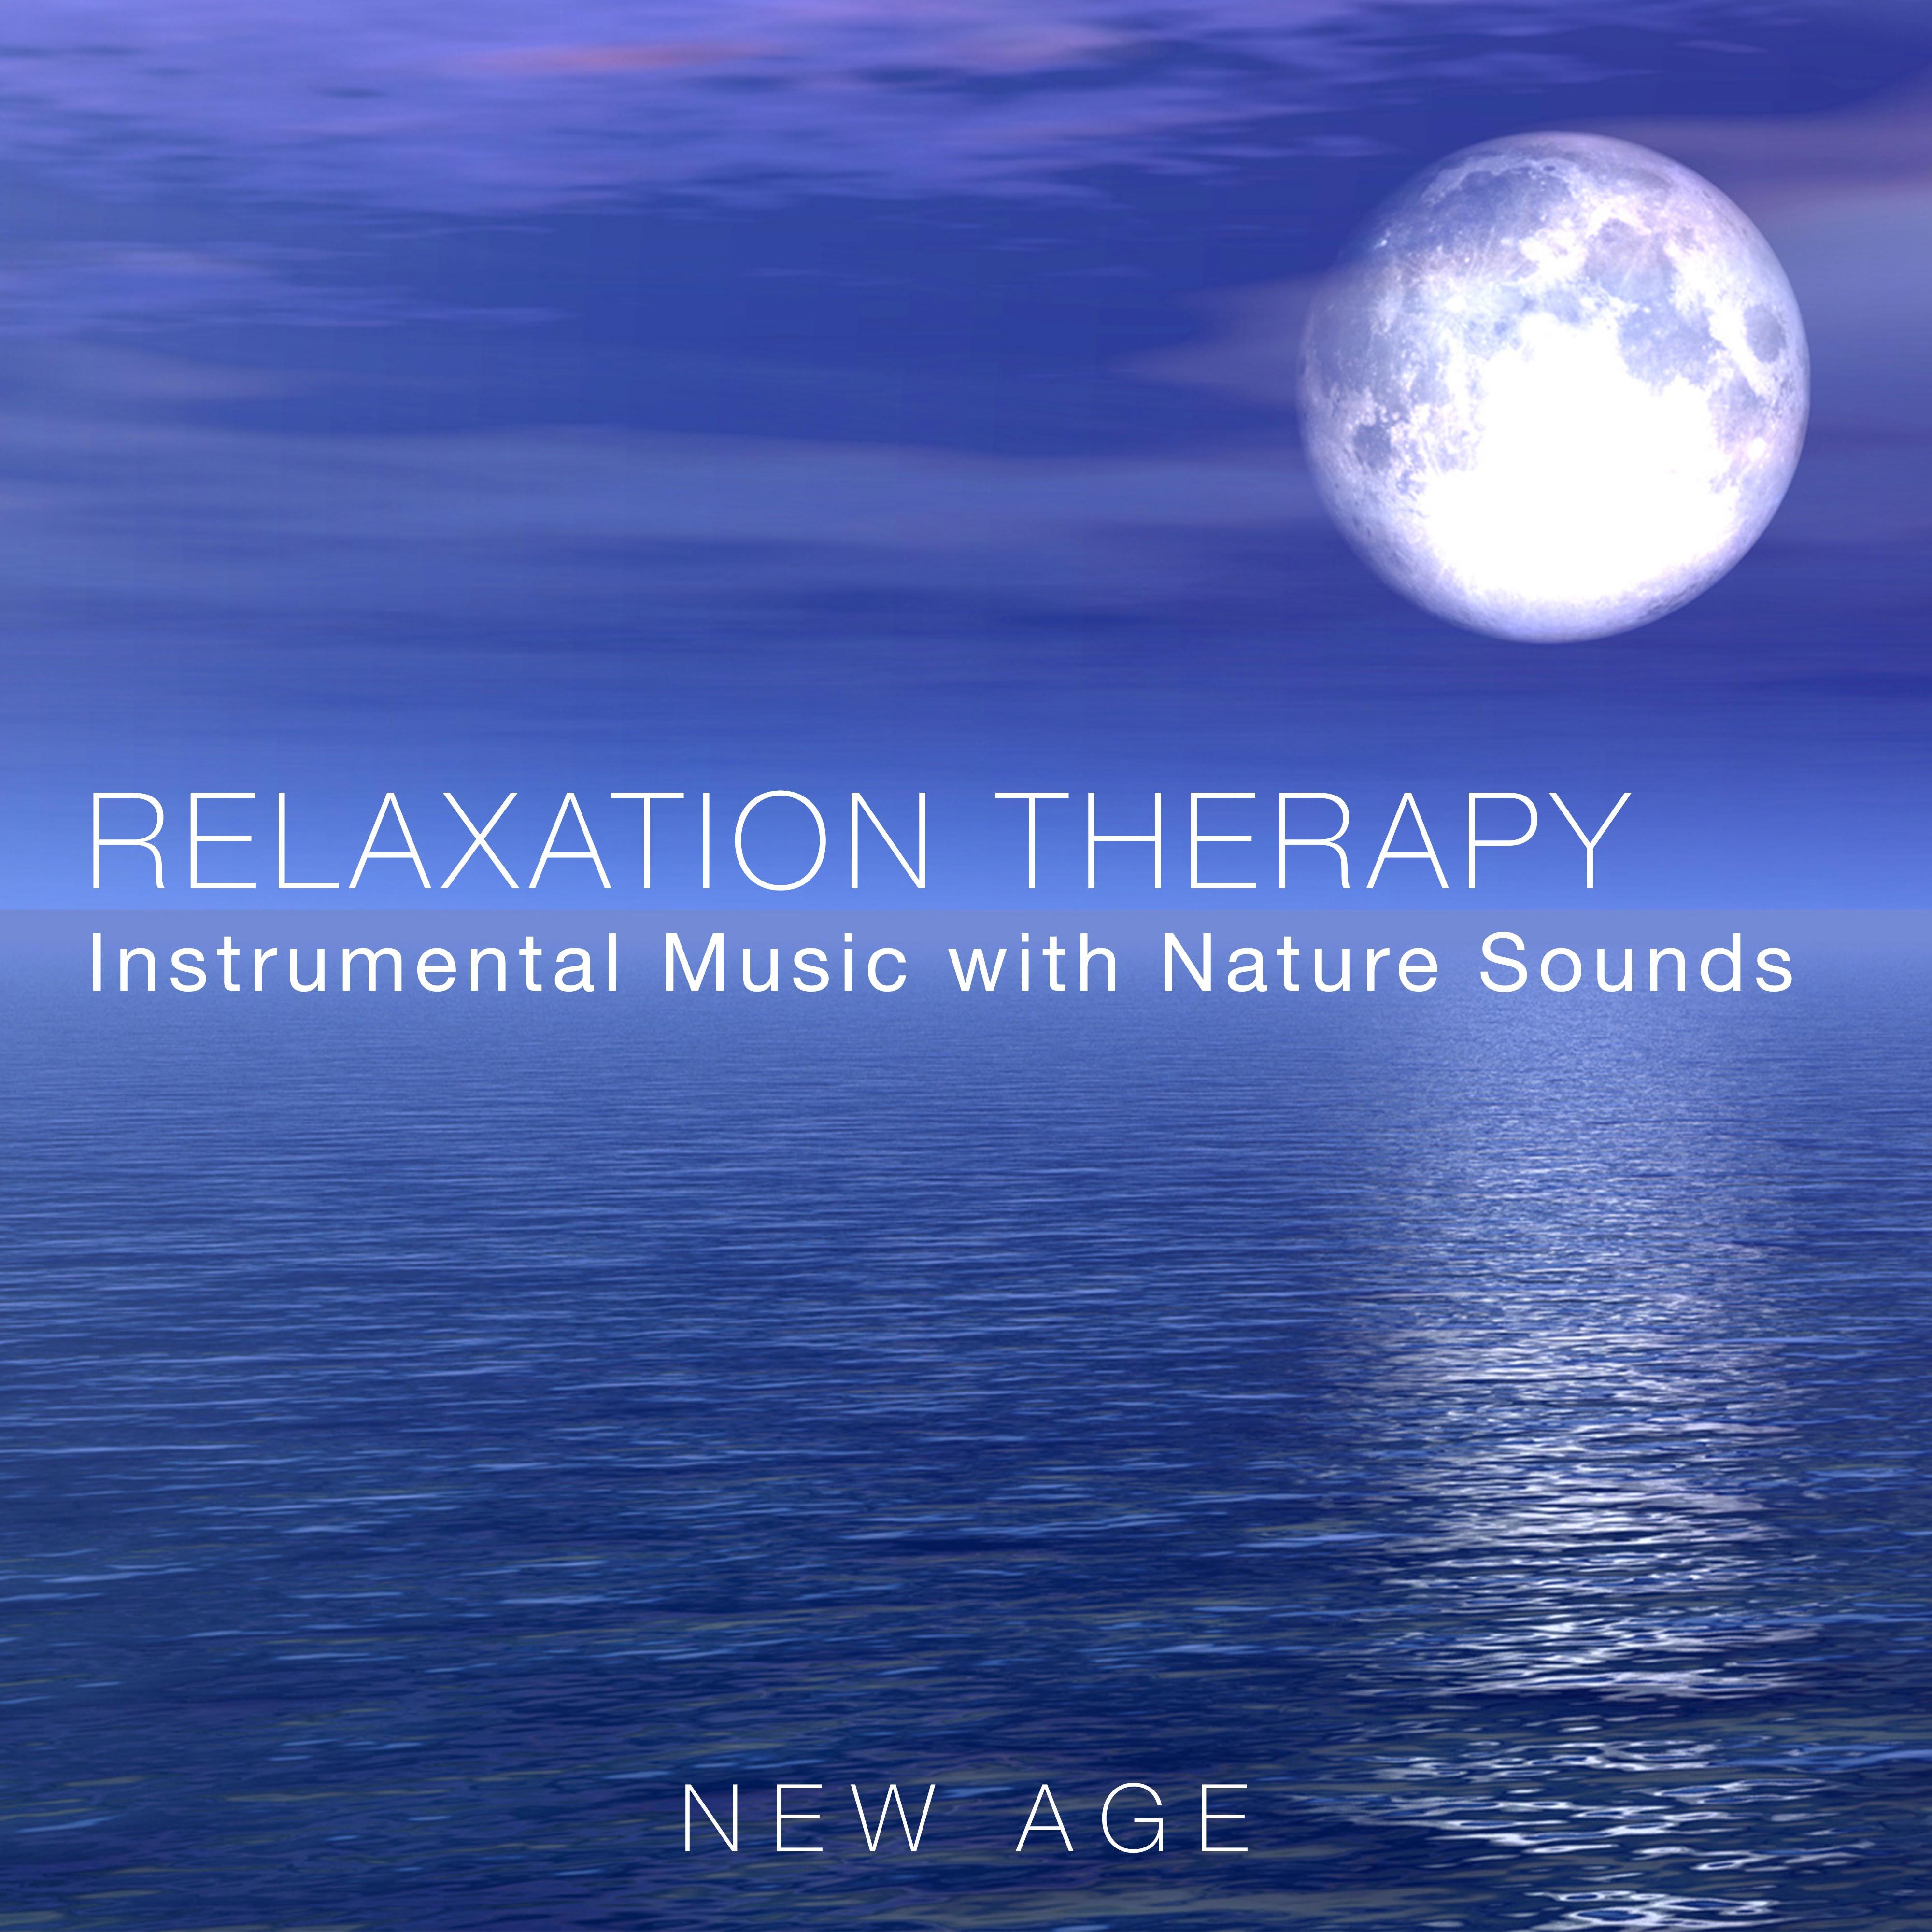 Relaxation Therapy - Instrumental Music with Nature Sounds